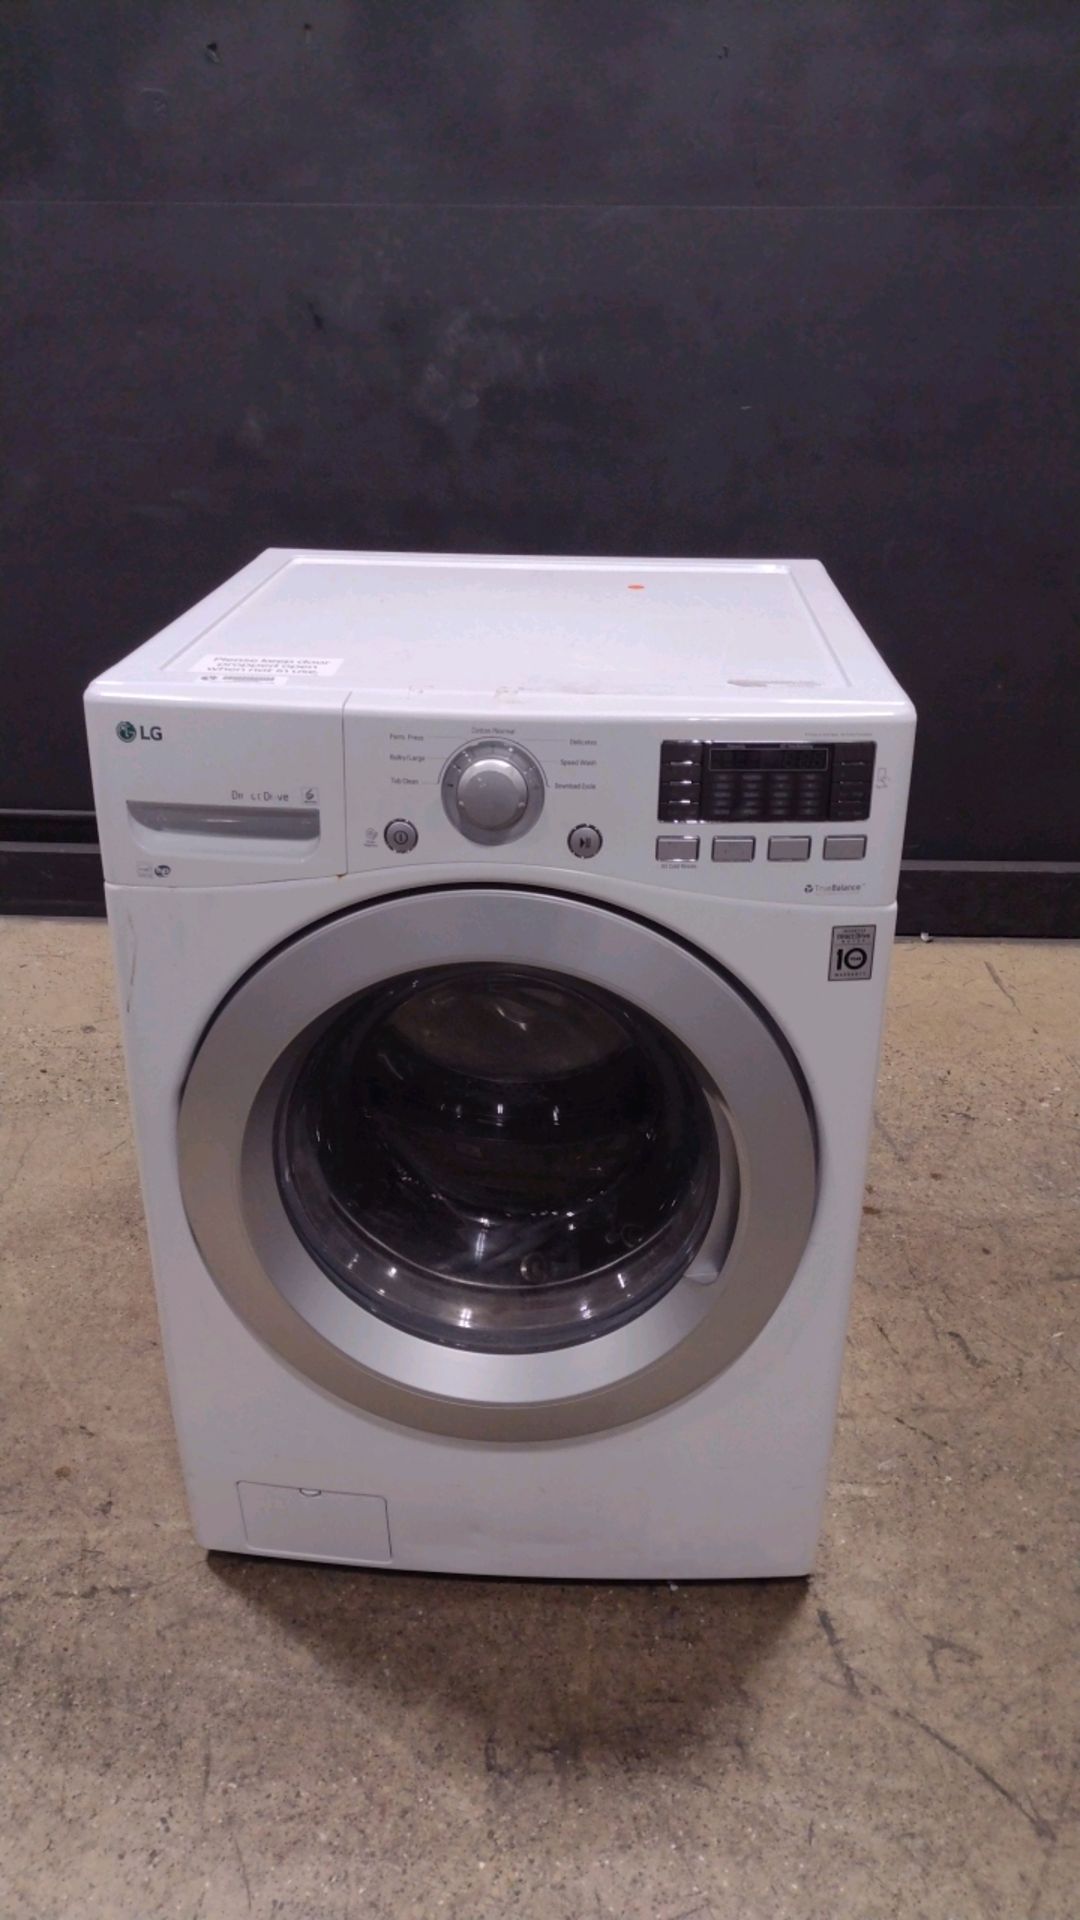 LG WM3170CW WASHER MACHINE (LOCATED AT 3325 MOUNT PROSPECT ROAD, FRANKLIN PARK, IL, 60131)